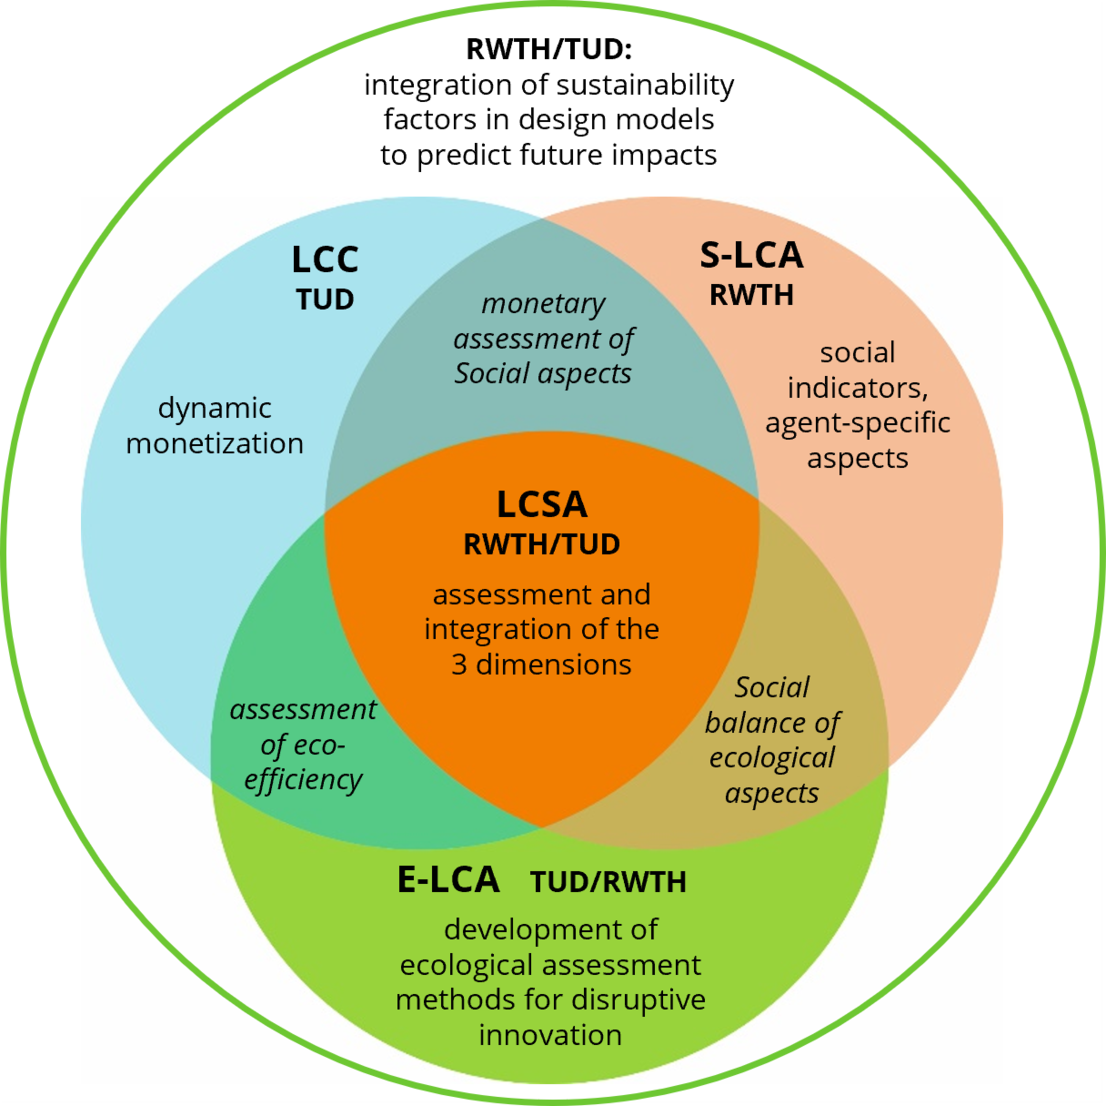 Structure of the life cycle-based sustainability assessment 